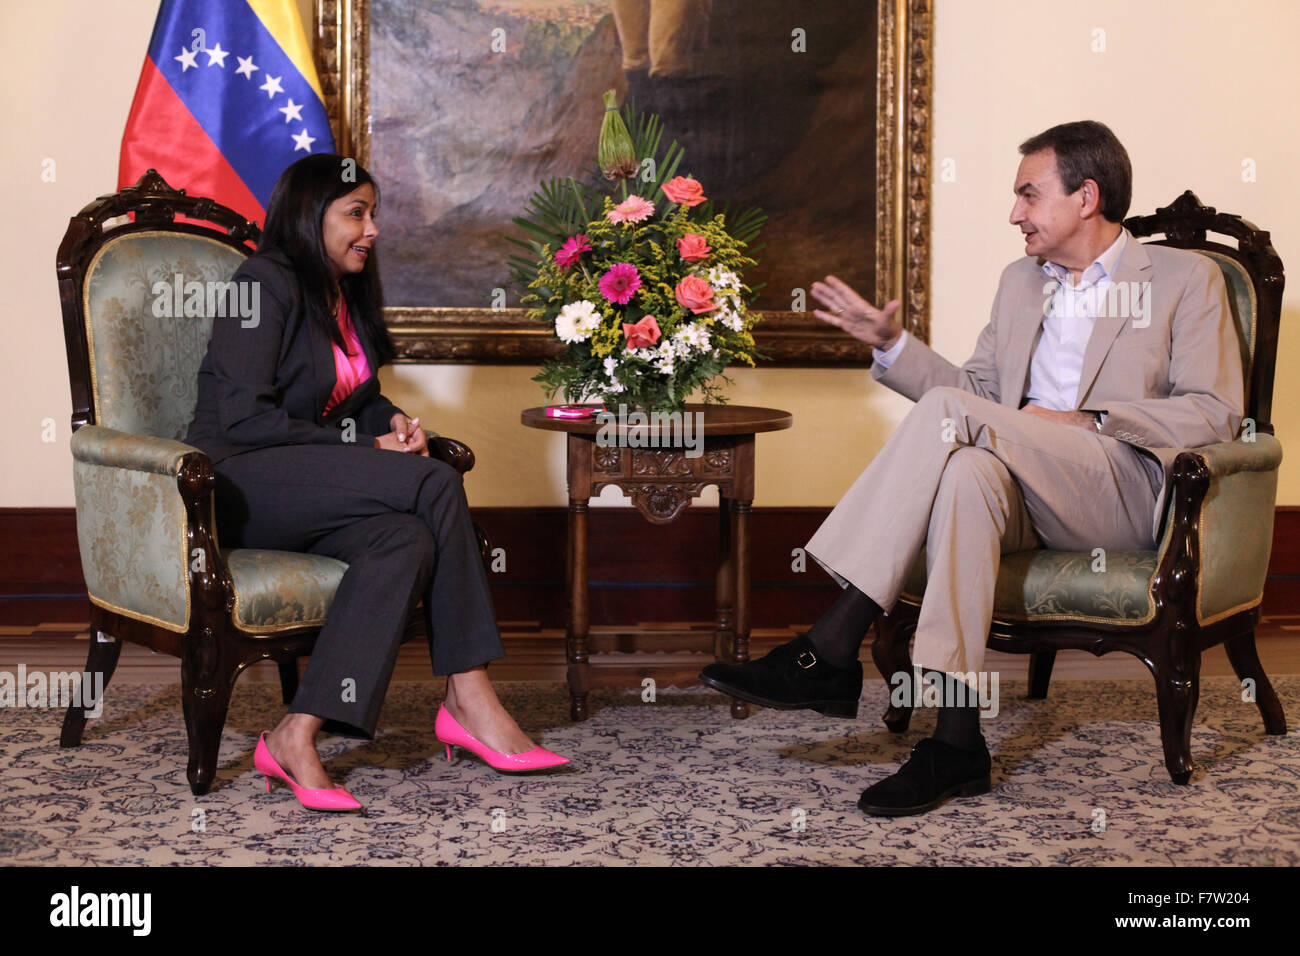 Caracas, Venezuela. 2nd Dec, 2015. Venezuela's Foreign Minister Delcy Rodriguez (L) meets with Spain's former Prime Minister Jose Luis Rodriguez Zapatero in Caracas, Venezuela, on Dec. 2, 2015. Jose Luis Rodriguez Zapatero, Panama's former President Martin Torrijos and Colombian Senator Horacio Serpa have been invited by the Venezuelan National Electoral Council to observe the parliamentary elections, to be held on Dec. 6. © Boris Vergara/Xinhua/Alamy Live News Stock Photo